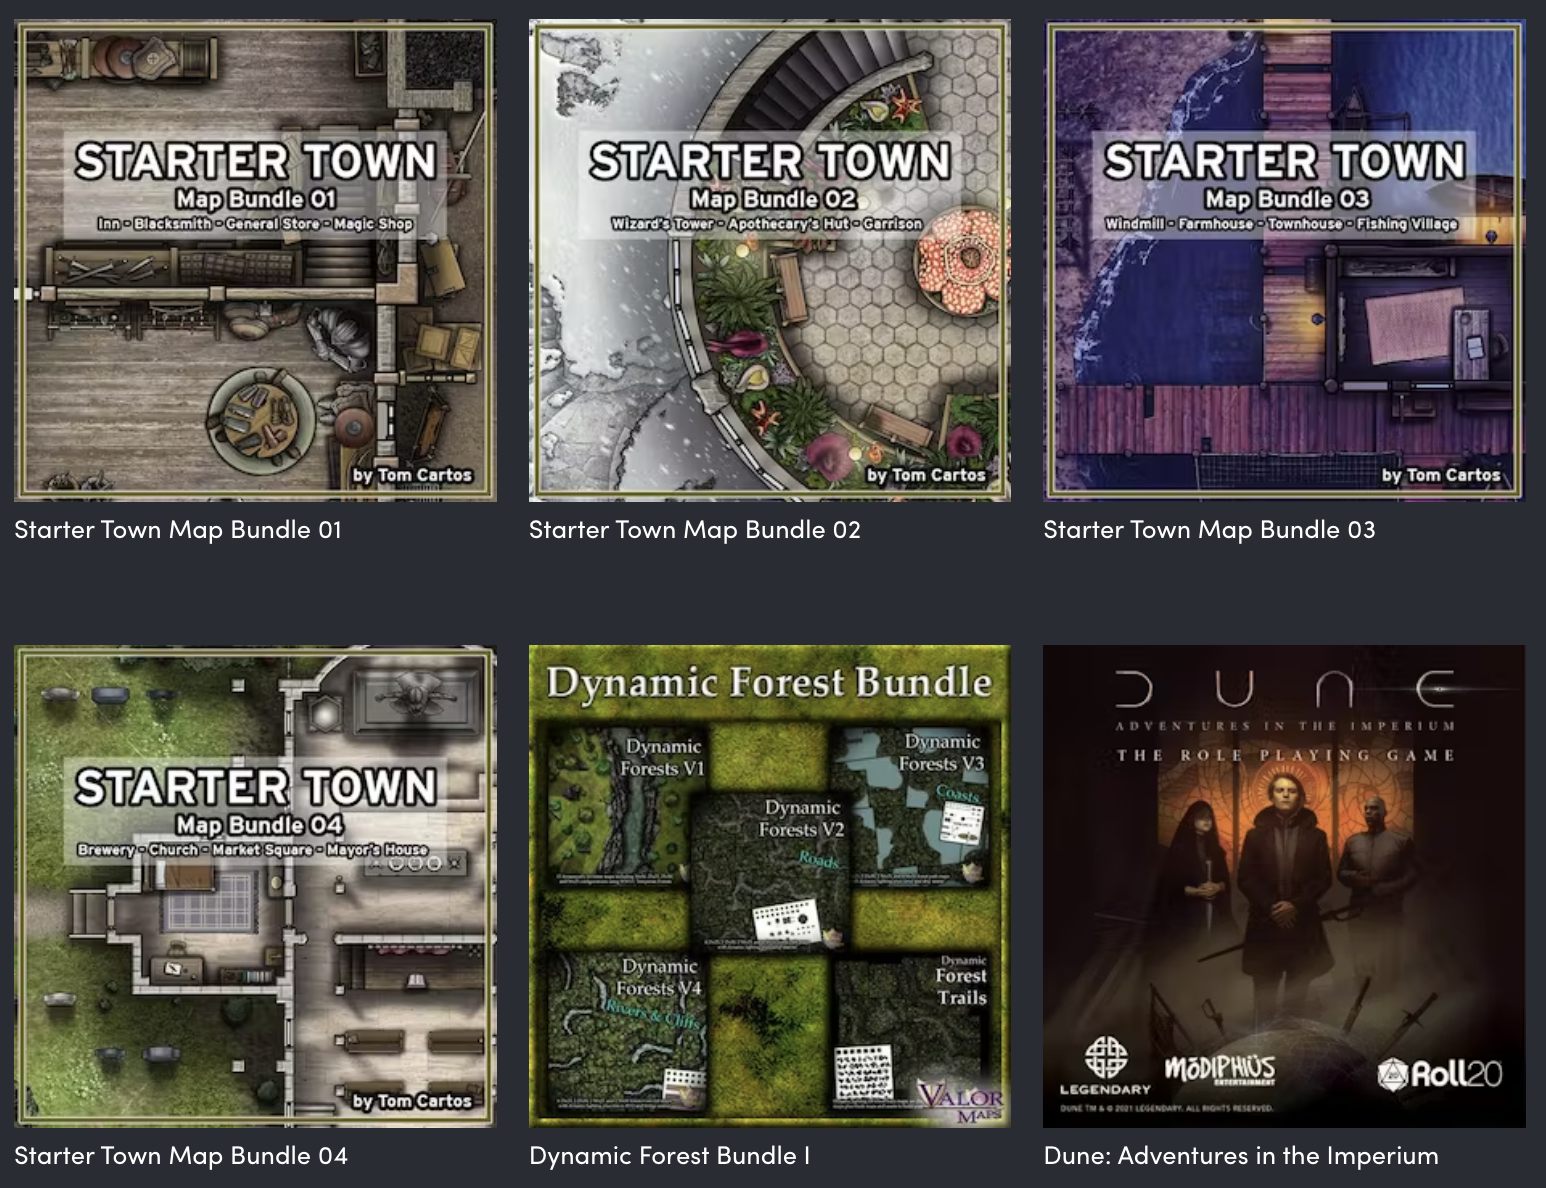 Roll20 RPG Humble Bundle features Dune, Pathfinder, Tales from the Loop &  more - Dexerto